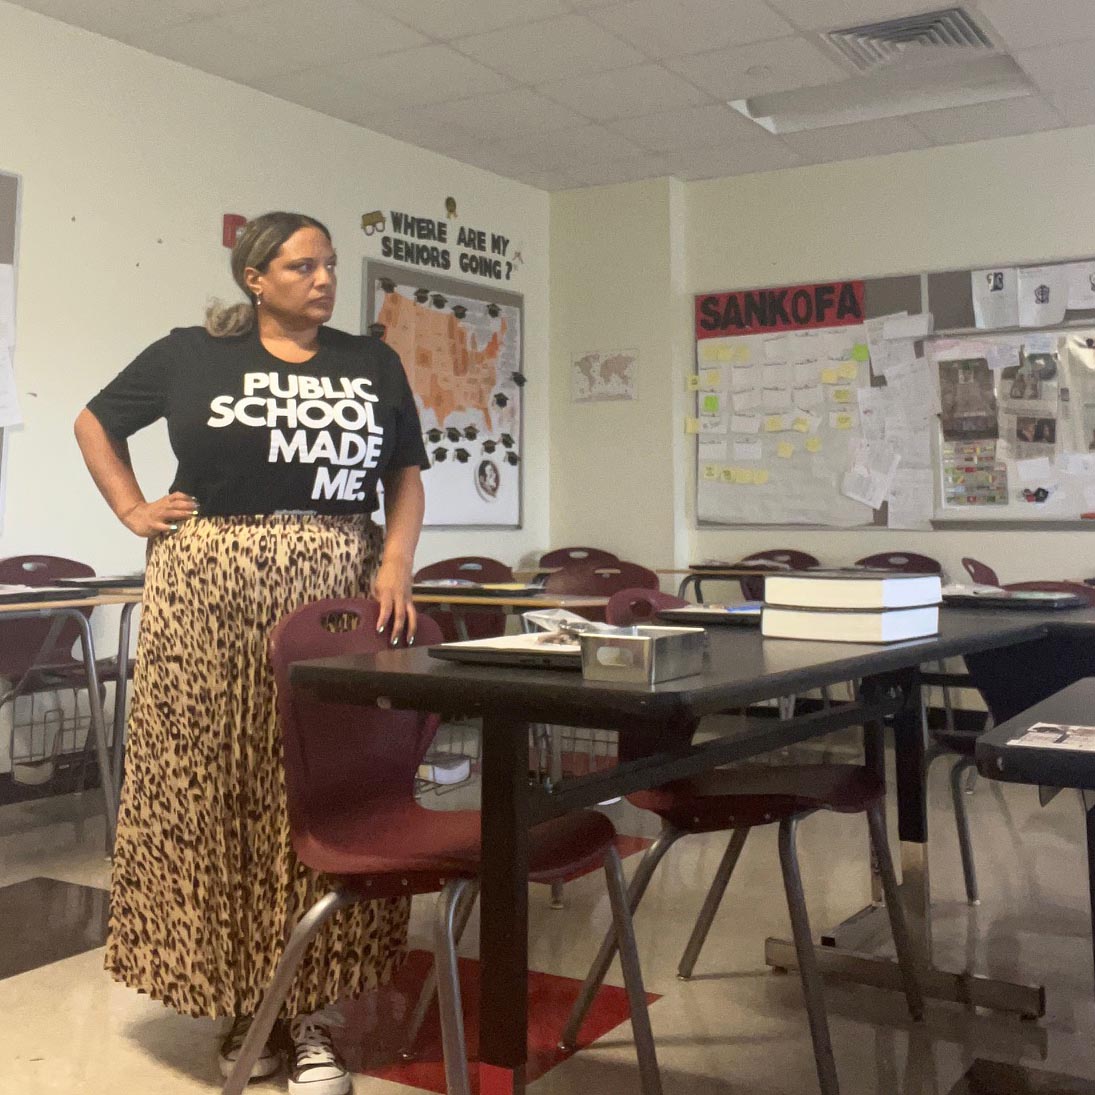 Person in a black shirt that reads "public schools made me" stands in an empty classroom.